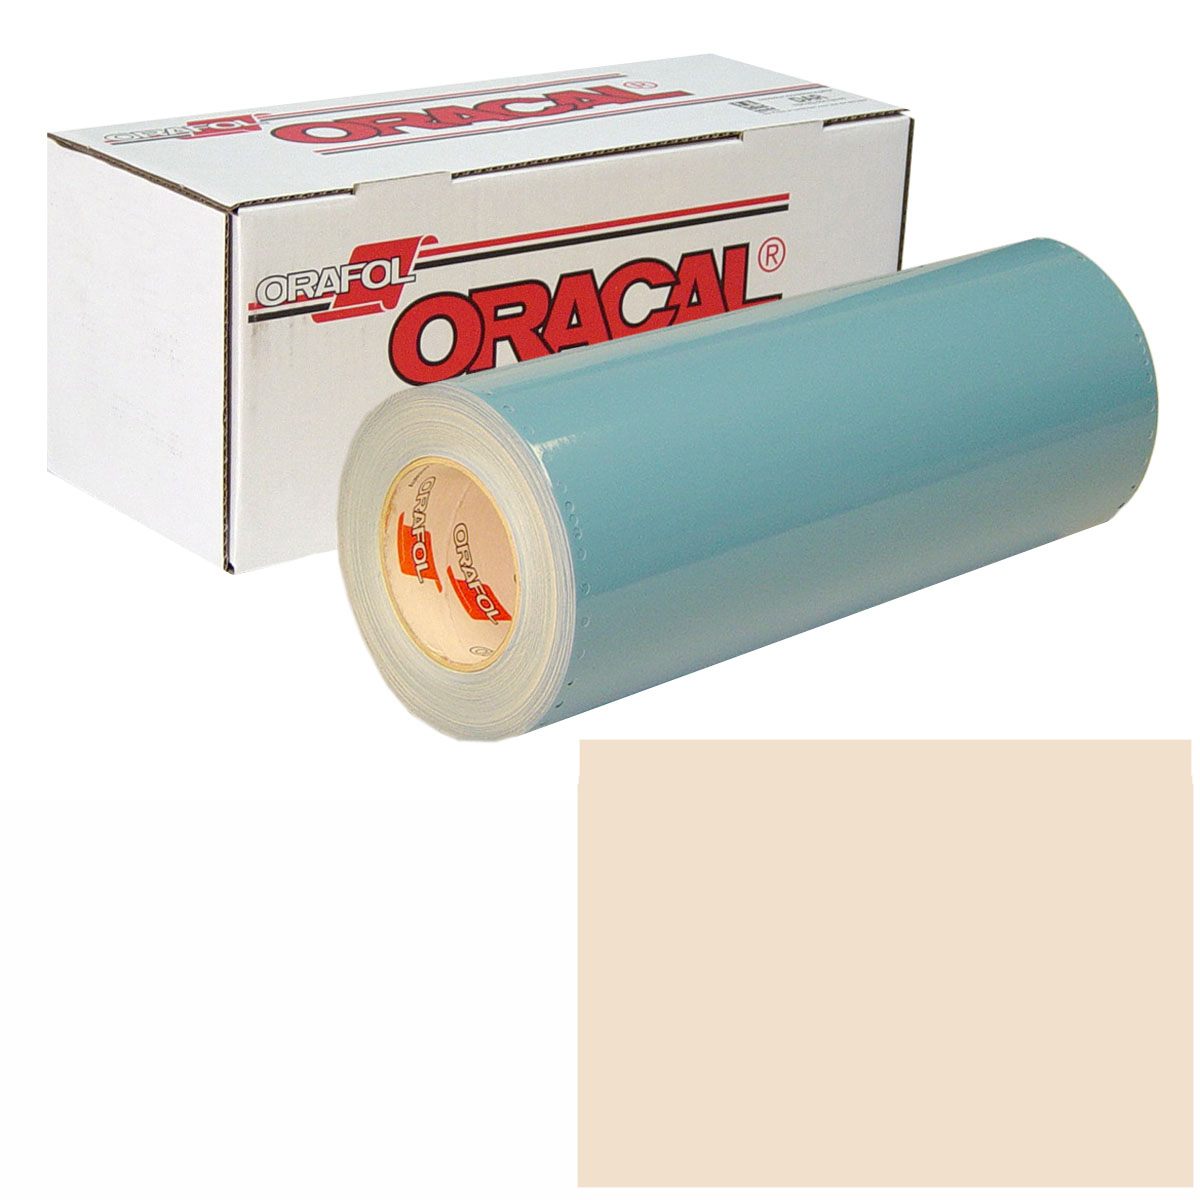 ORACAL 751 15in X 10yd 018 Light Ivory